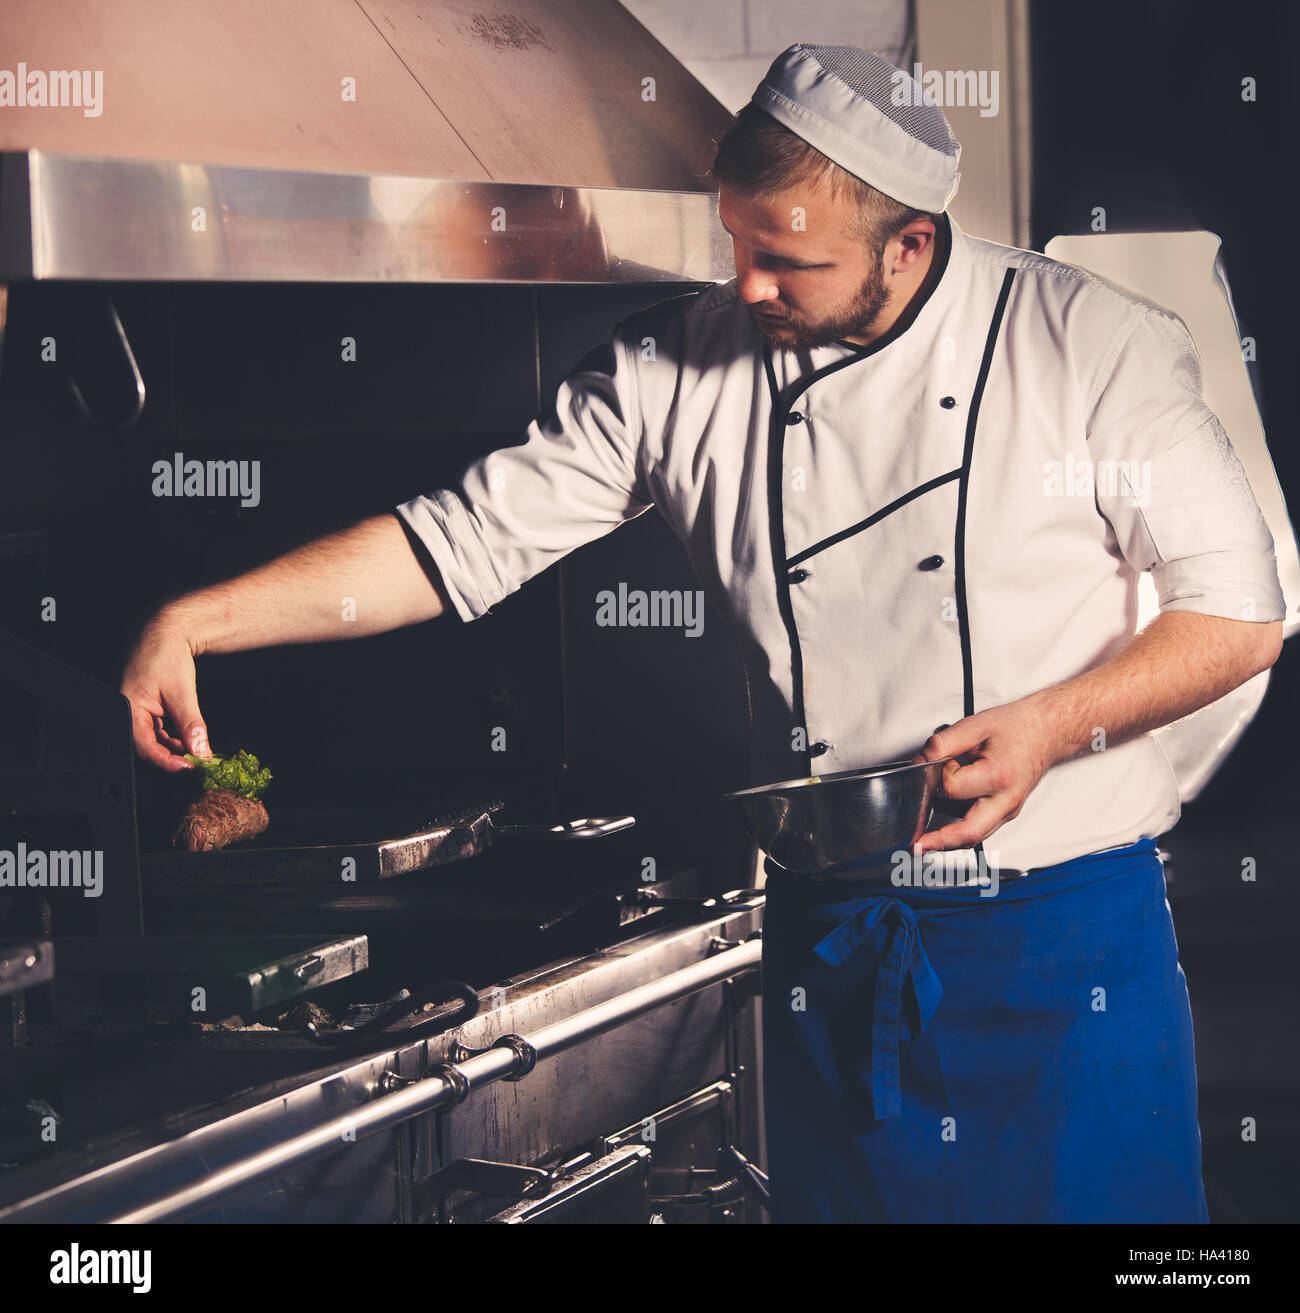 young chef preparing meat Stock Photo